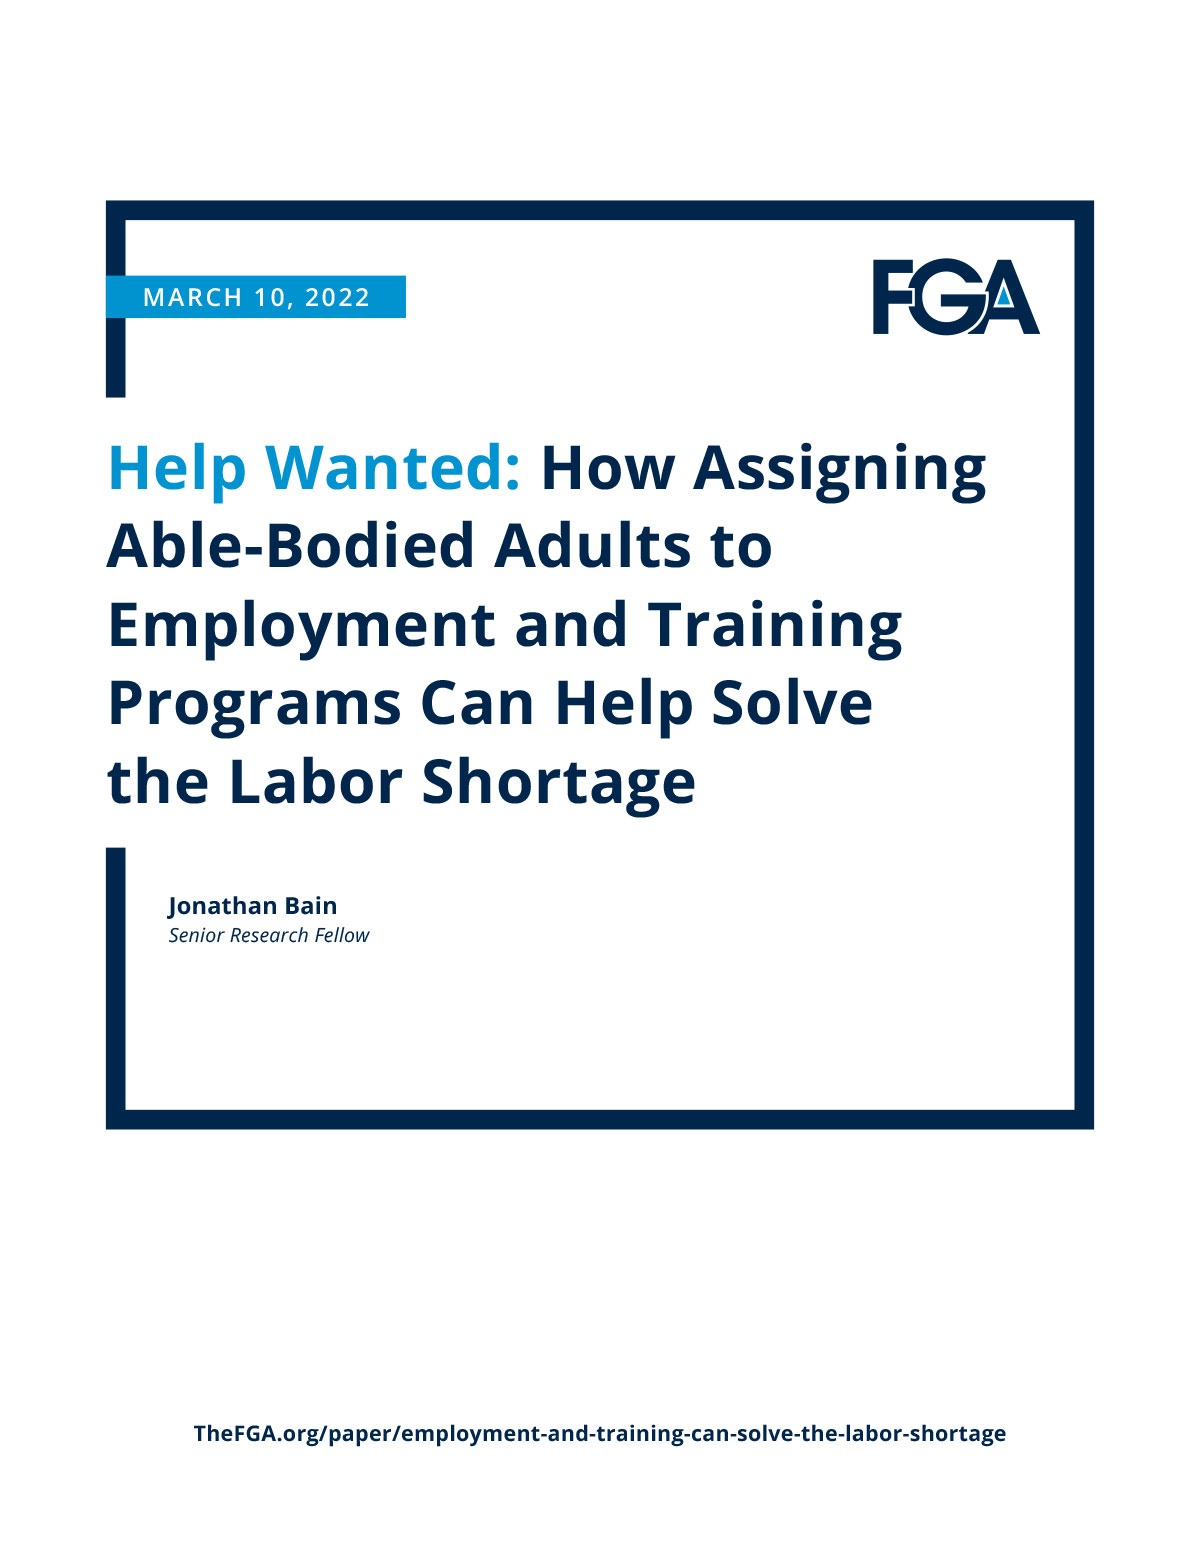 Help Wanted: How Assigning Able-Bodied Adults to Employment and Training Programs Can Help Solve the Labor Shortage